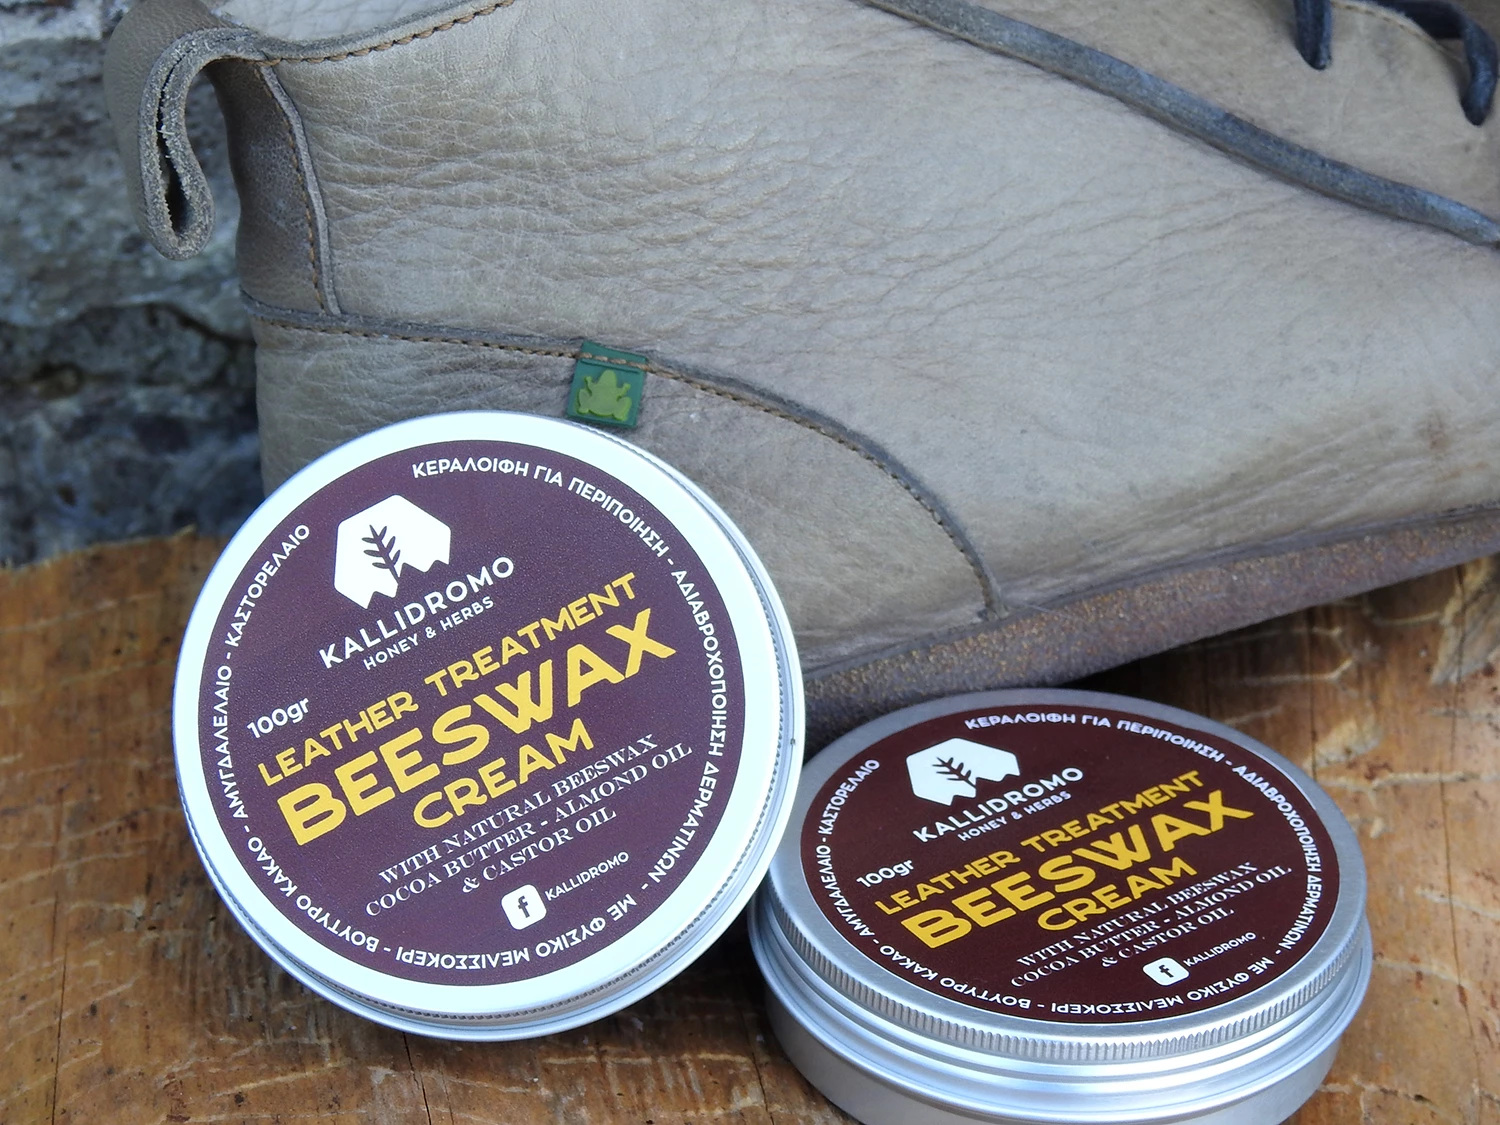 Beeswax Cream
for Leather products treatment
